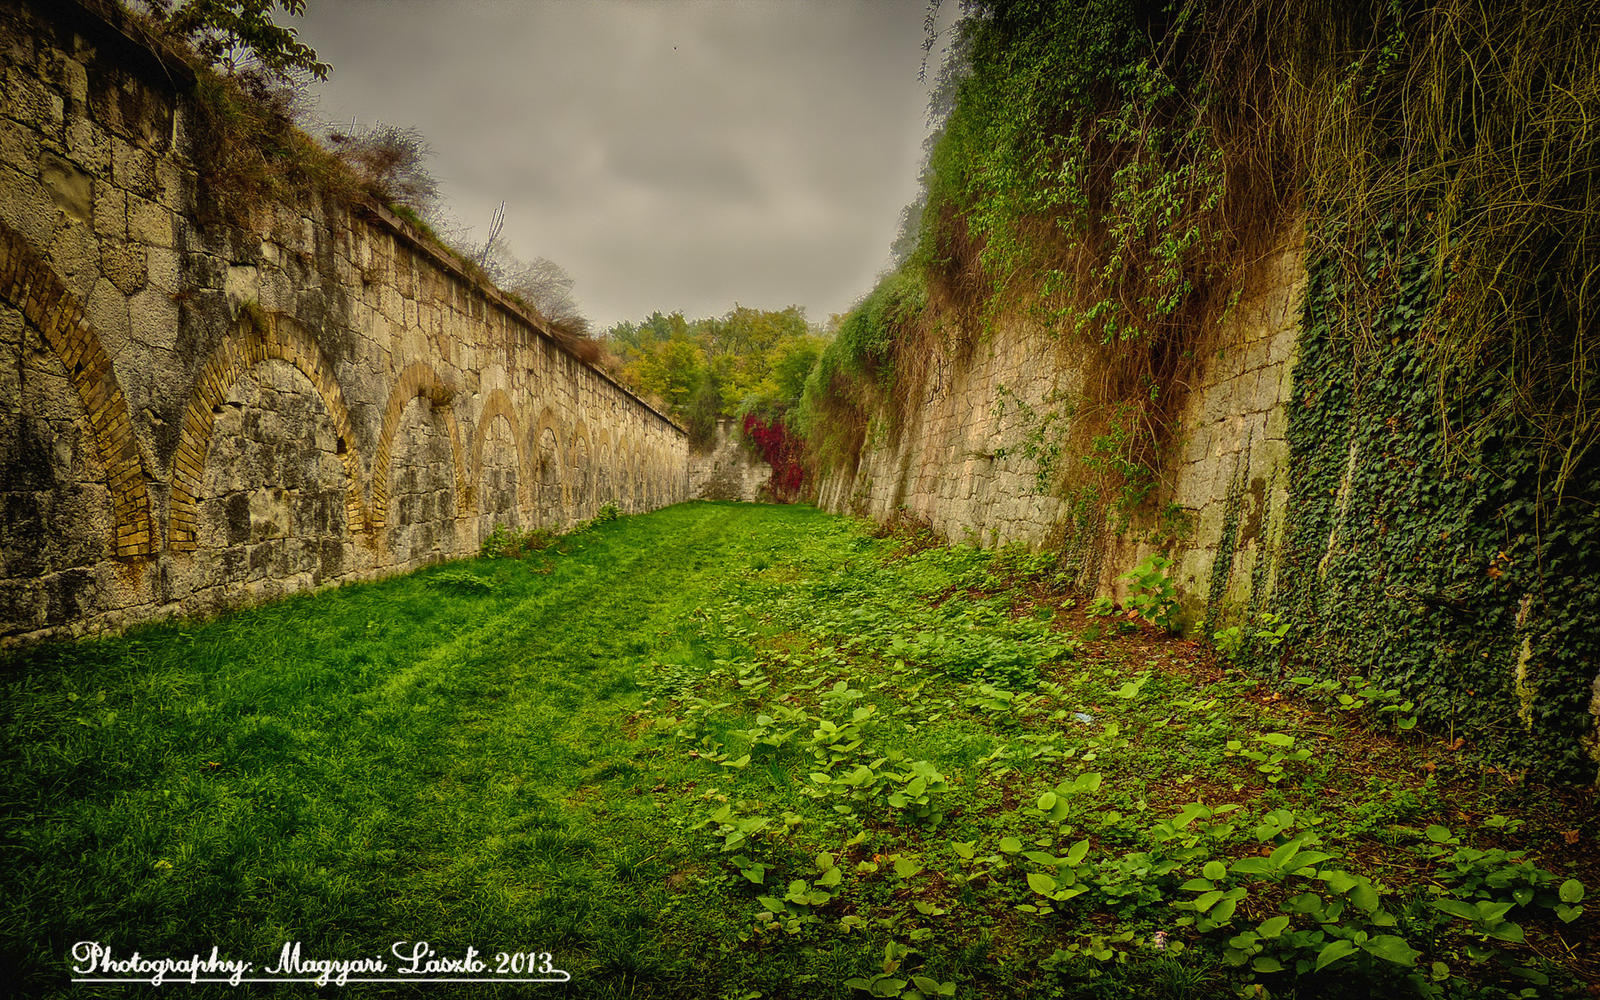 The Komarom fort .(Hungary) HDR.